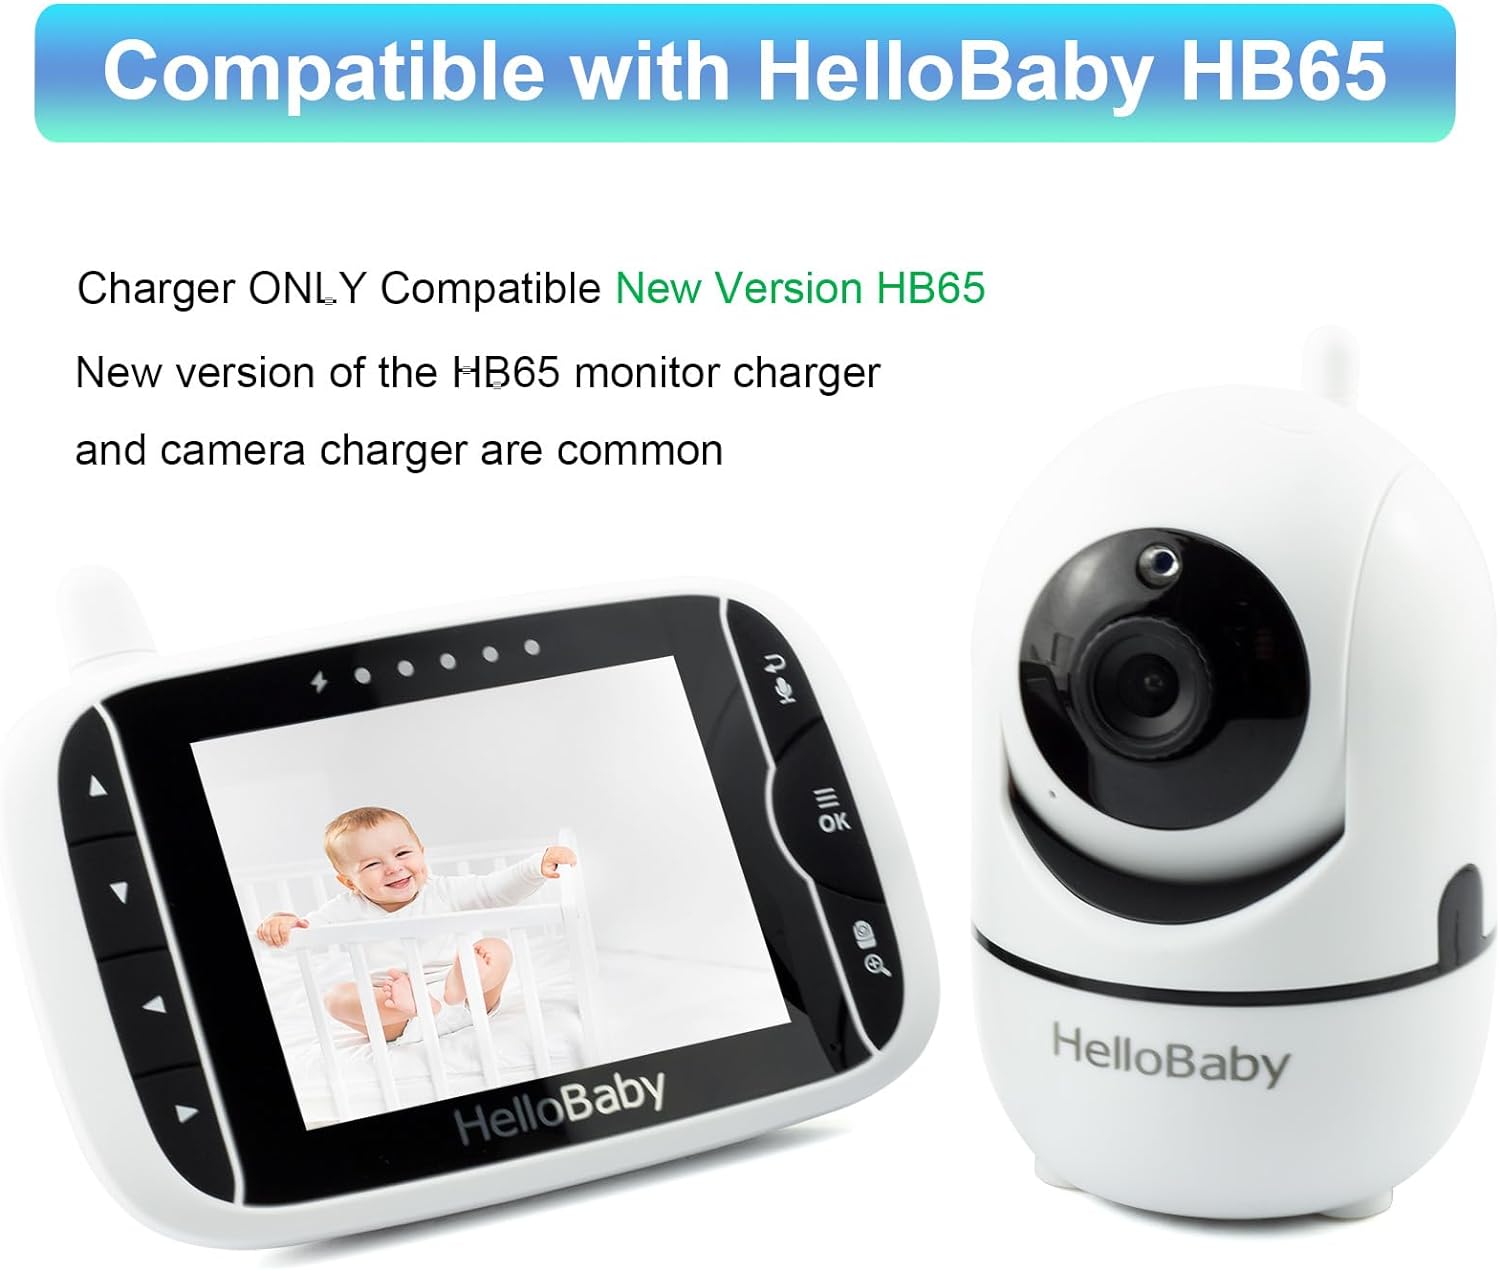 HB65 Charger for HelloBaby HB65 HB65TX Monitor and Camera Replacment Hello Baby Power Cord Adapter 5V Charging Cable (No